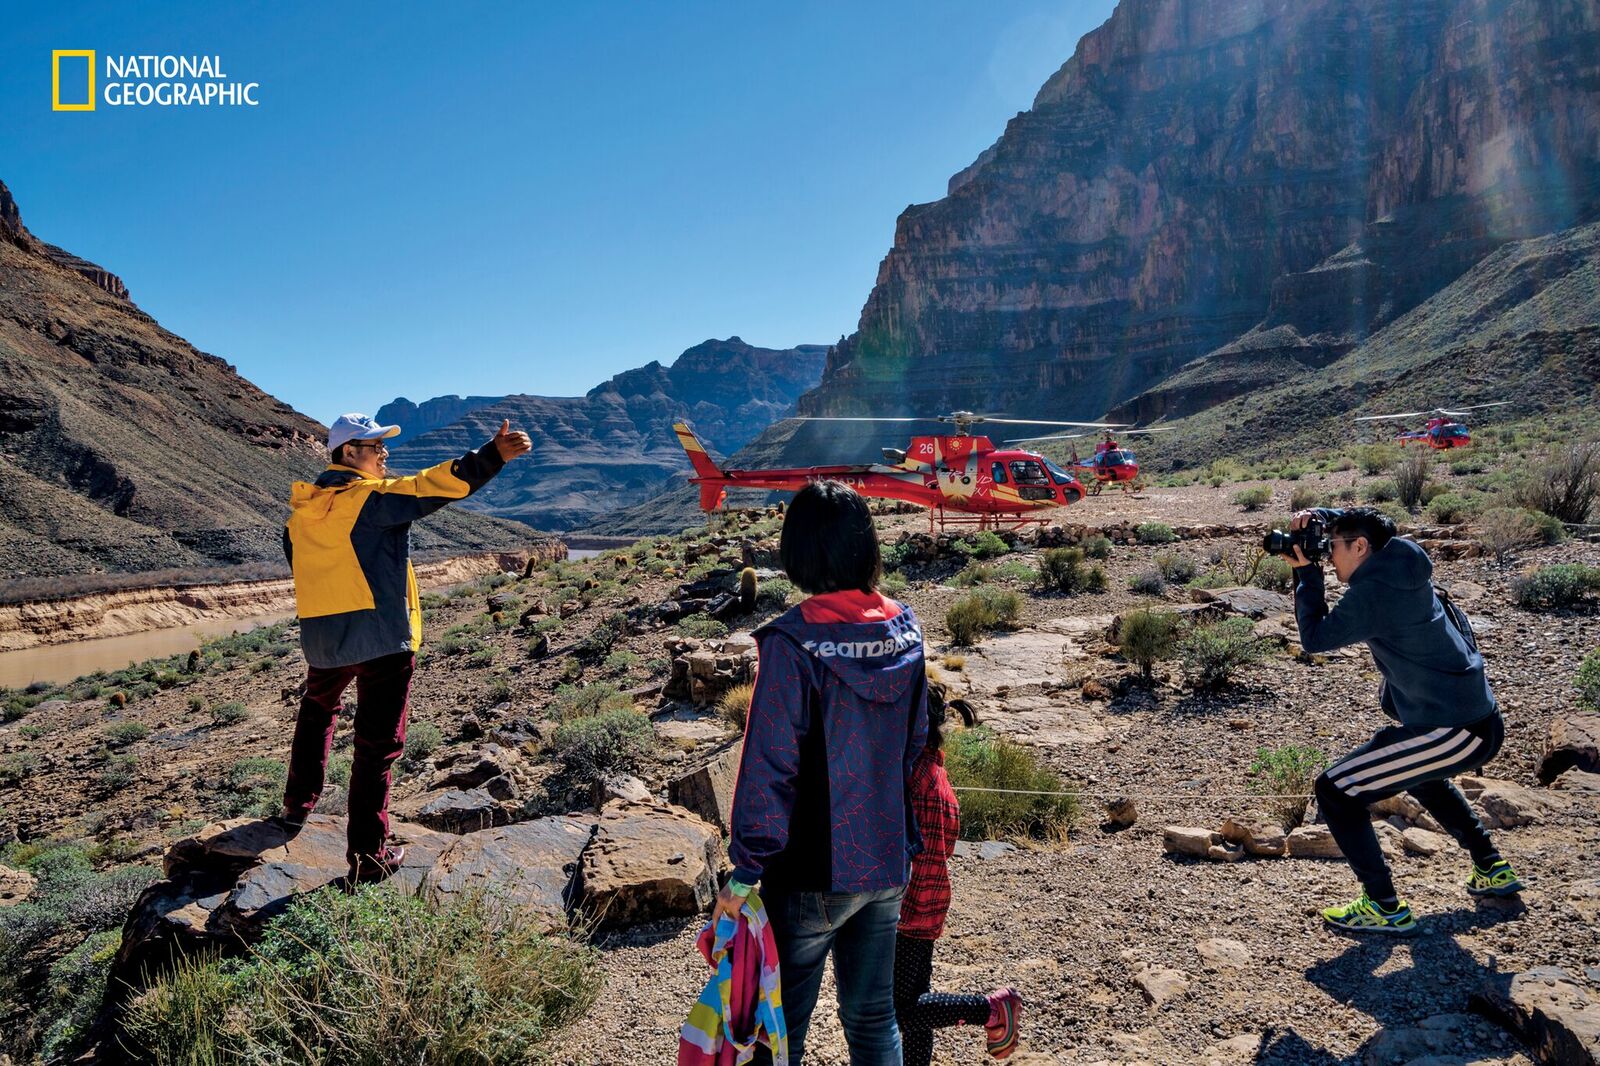 National Geographic article focuses on Grand Canyon thruhike and